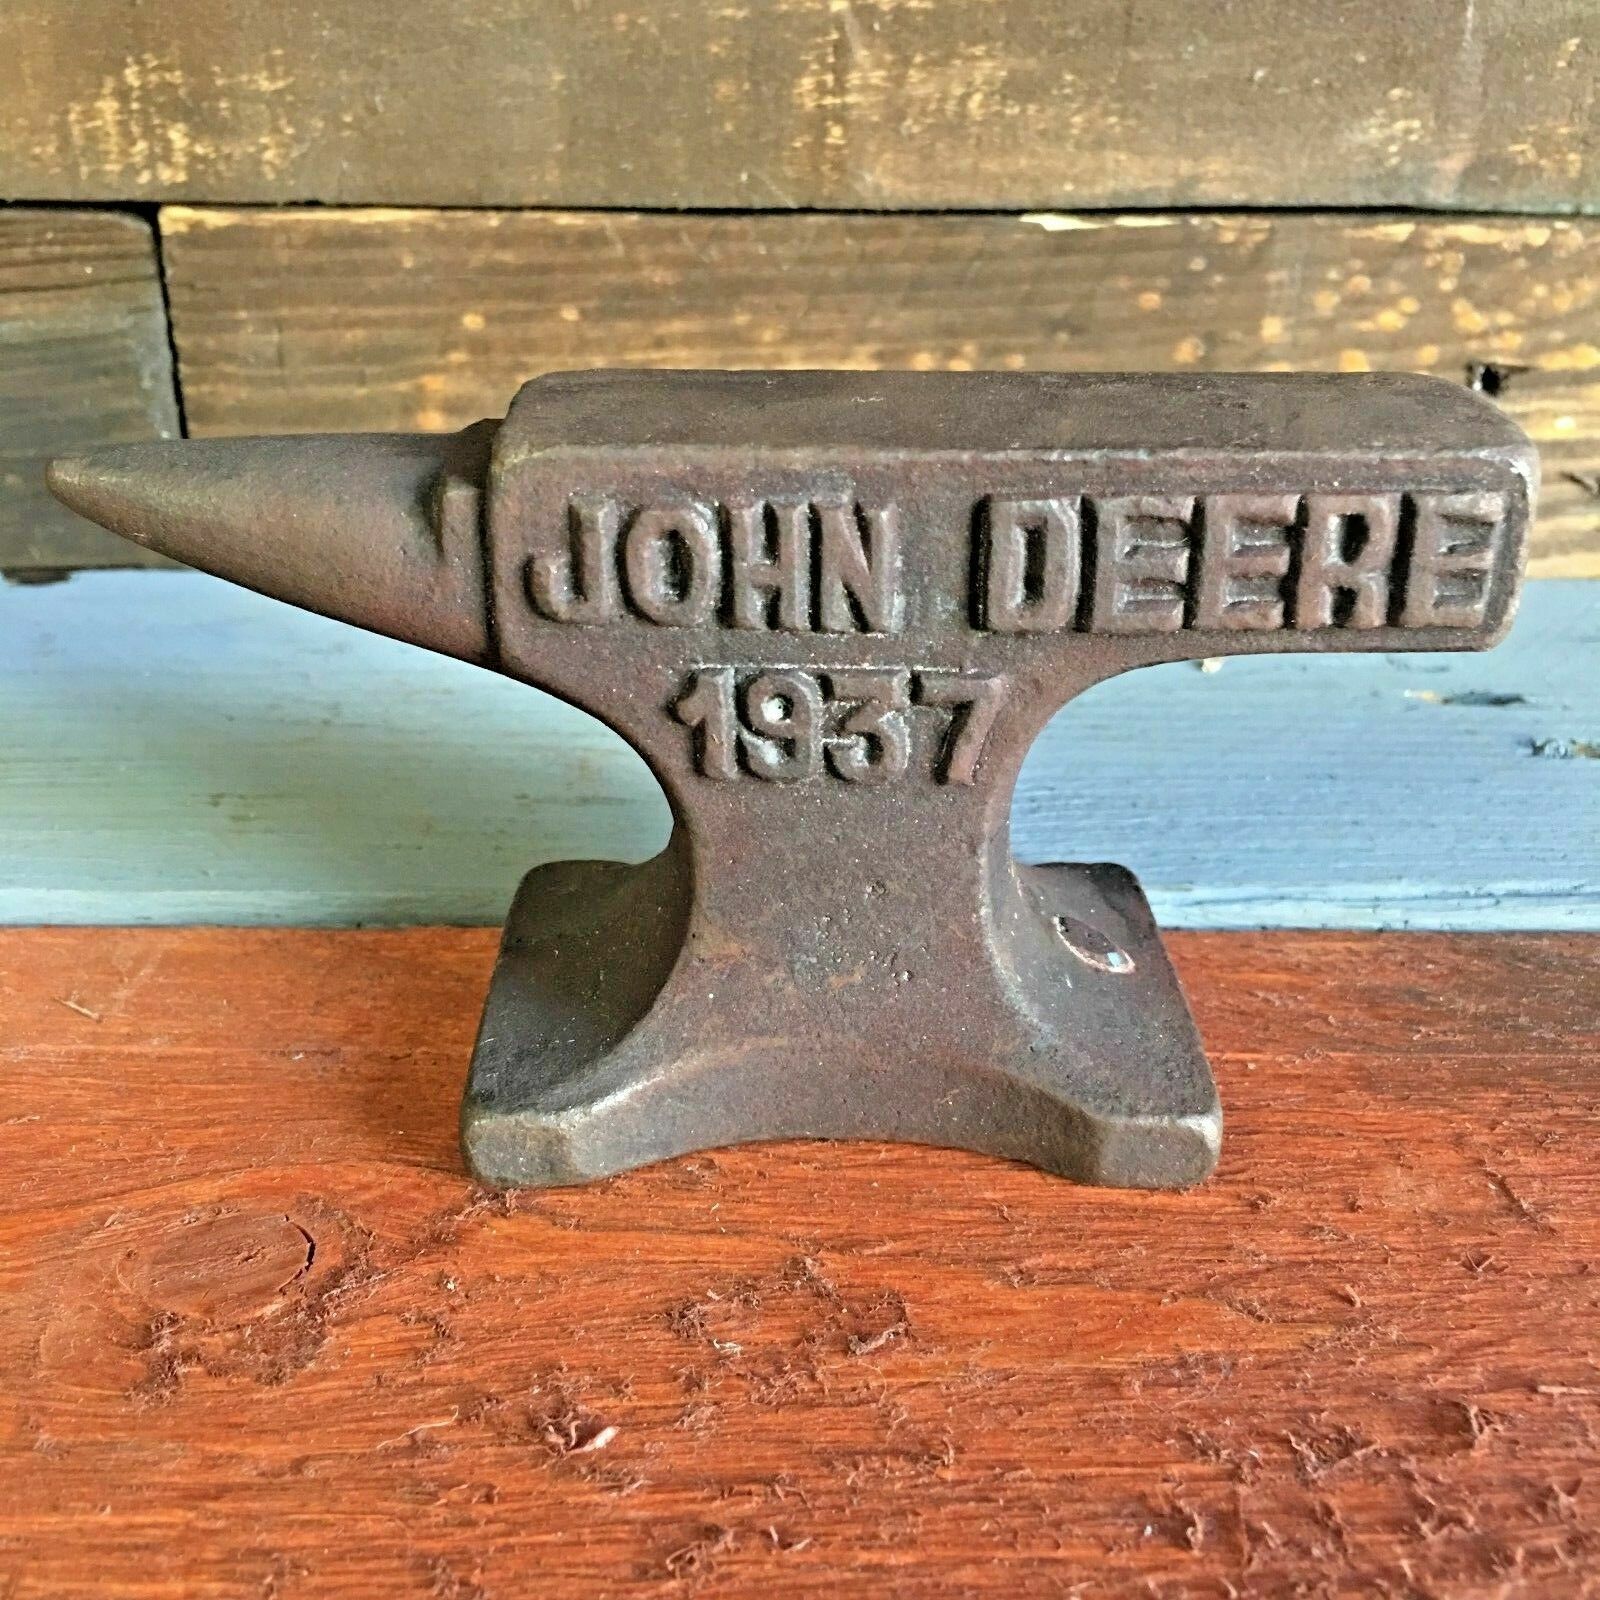 John Deere 1937 Cast Iron Anvil W/ Antique Finish and Raised Letters Paperweight